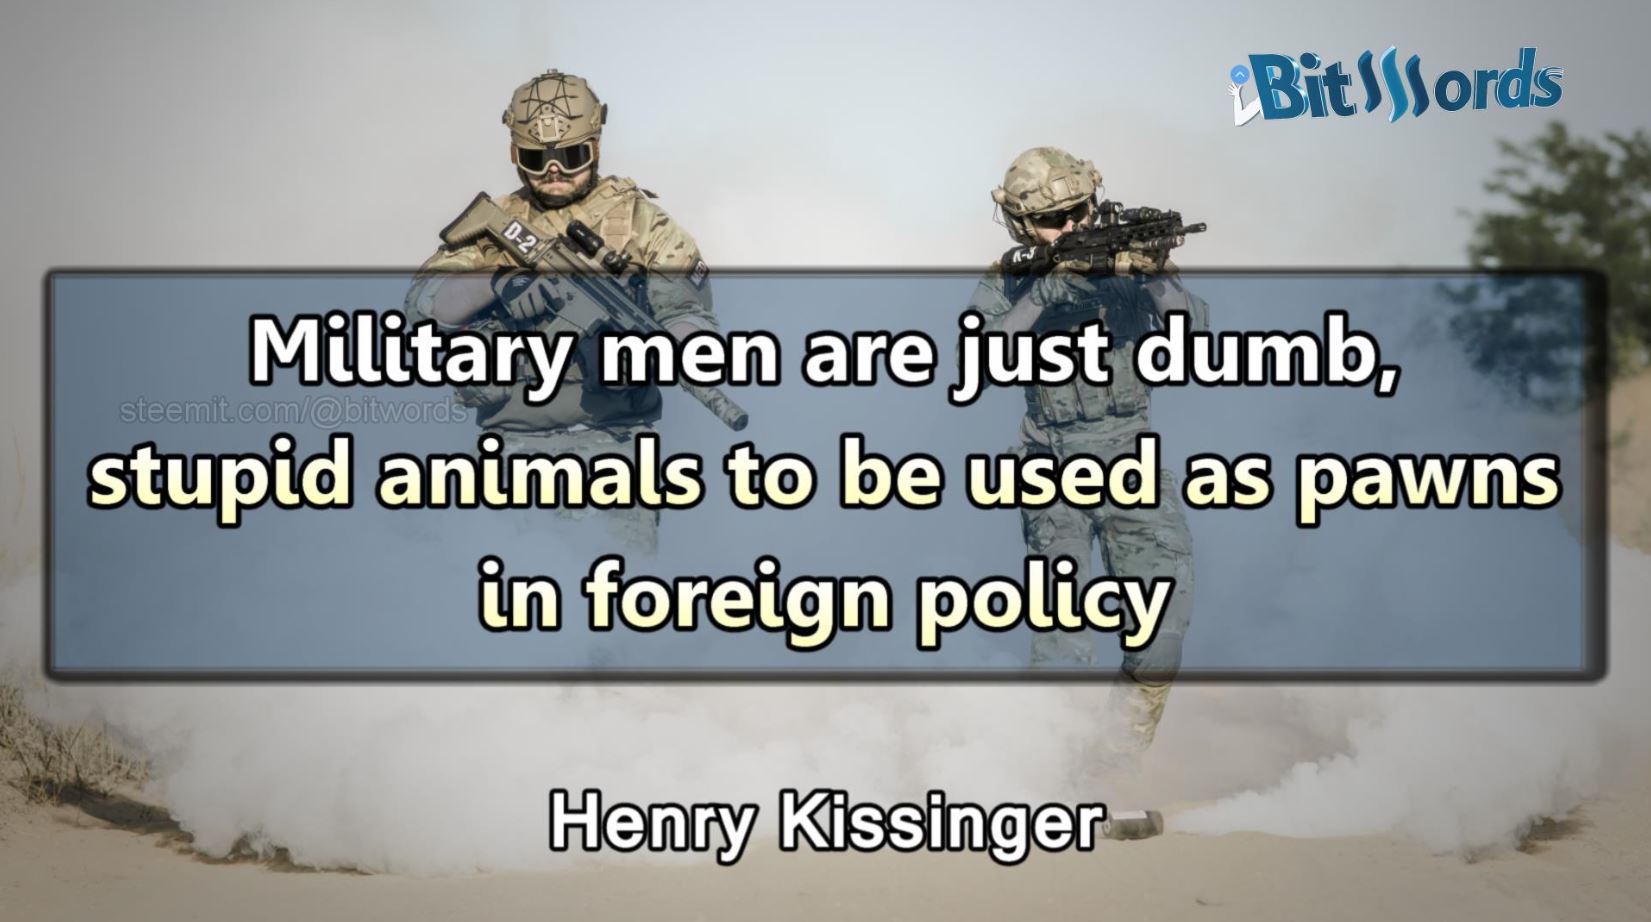 bitwords steemit quote of the day henry kissinger military men are dumb.JPG